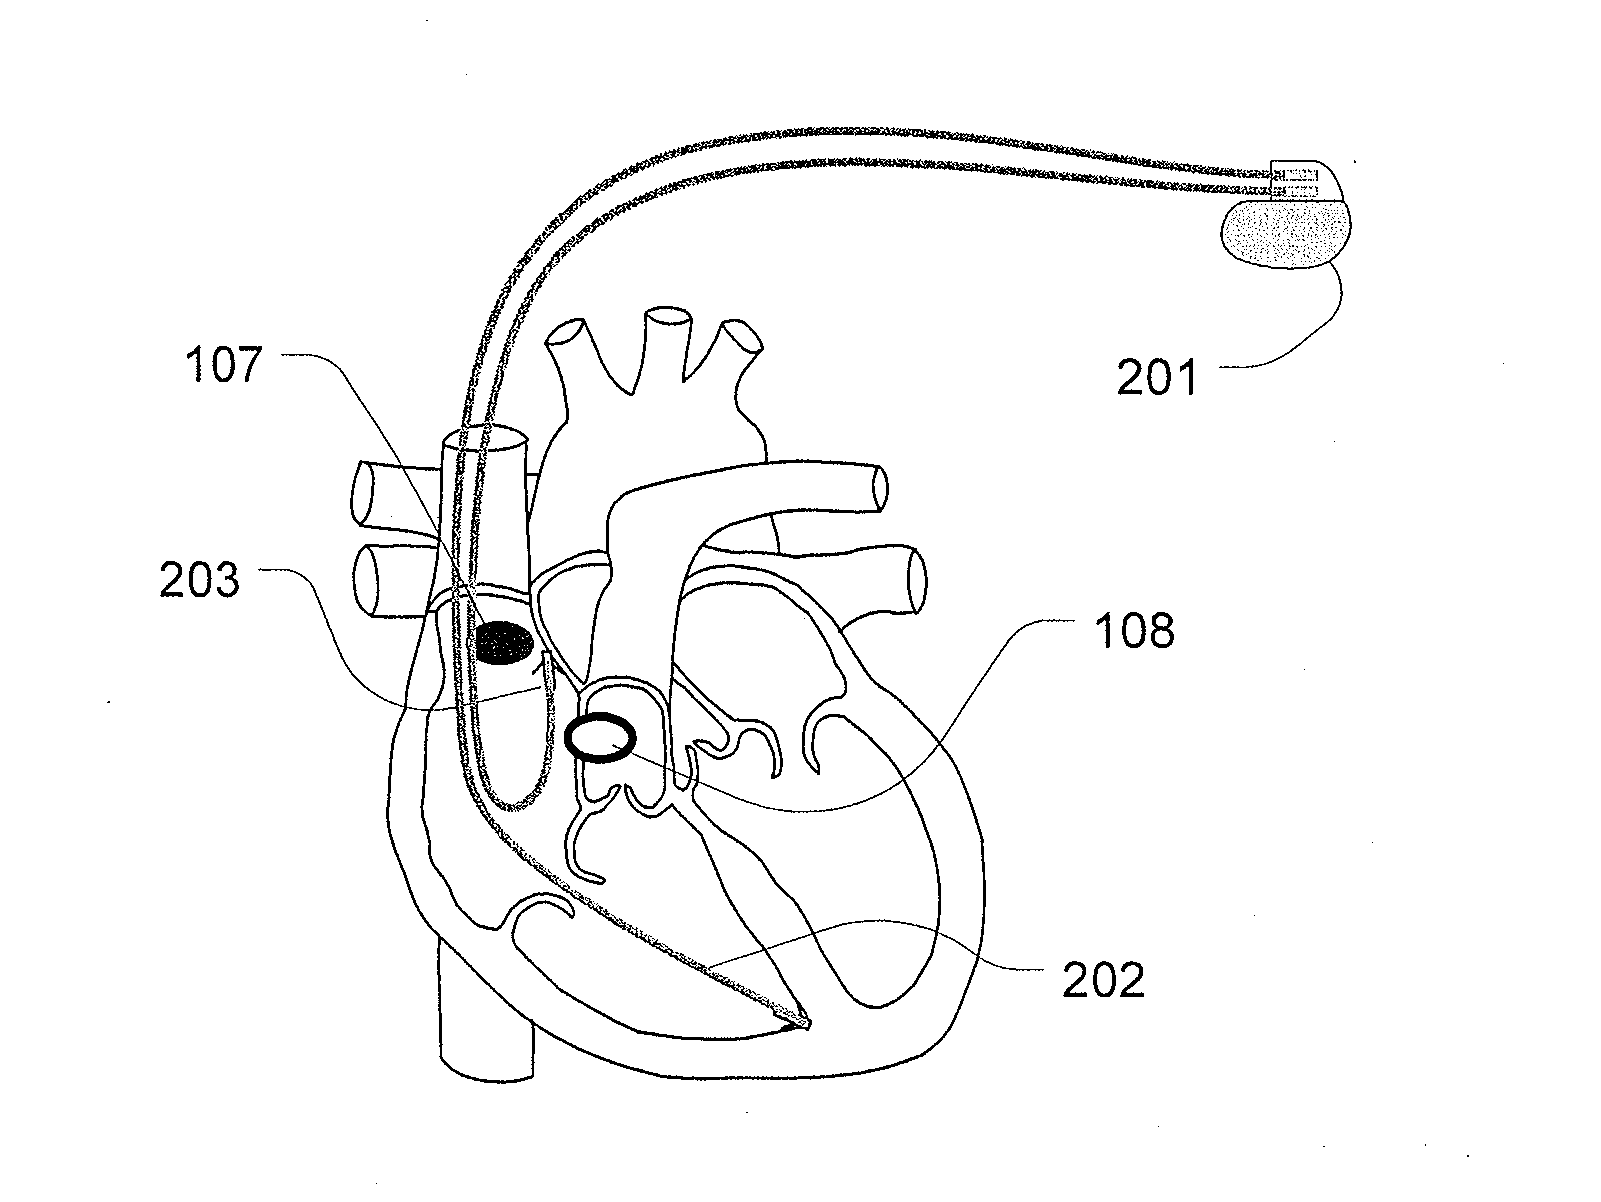 Methods and Apparatus to Stimulate the Heart